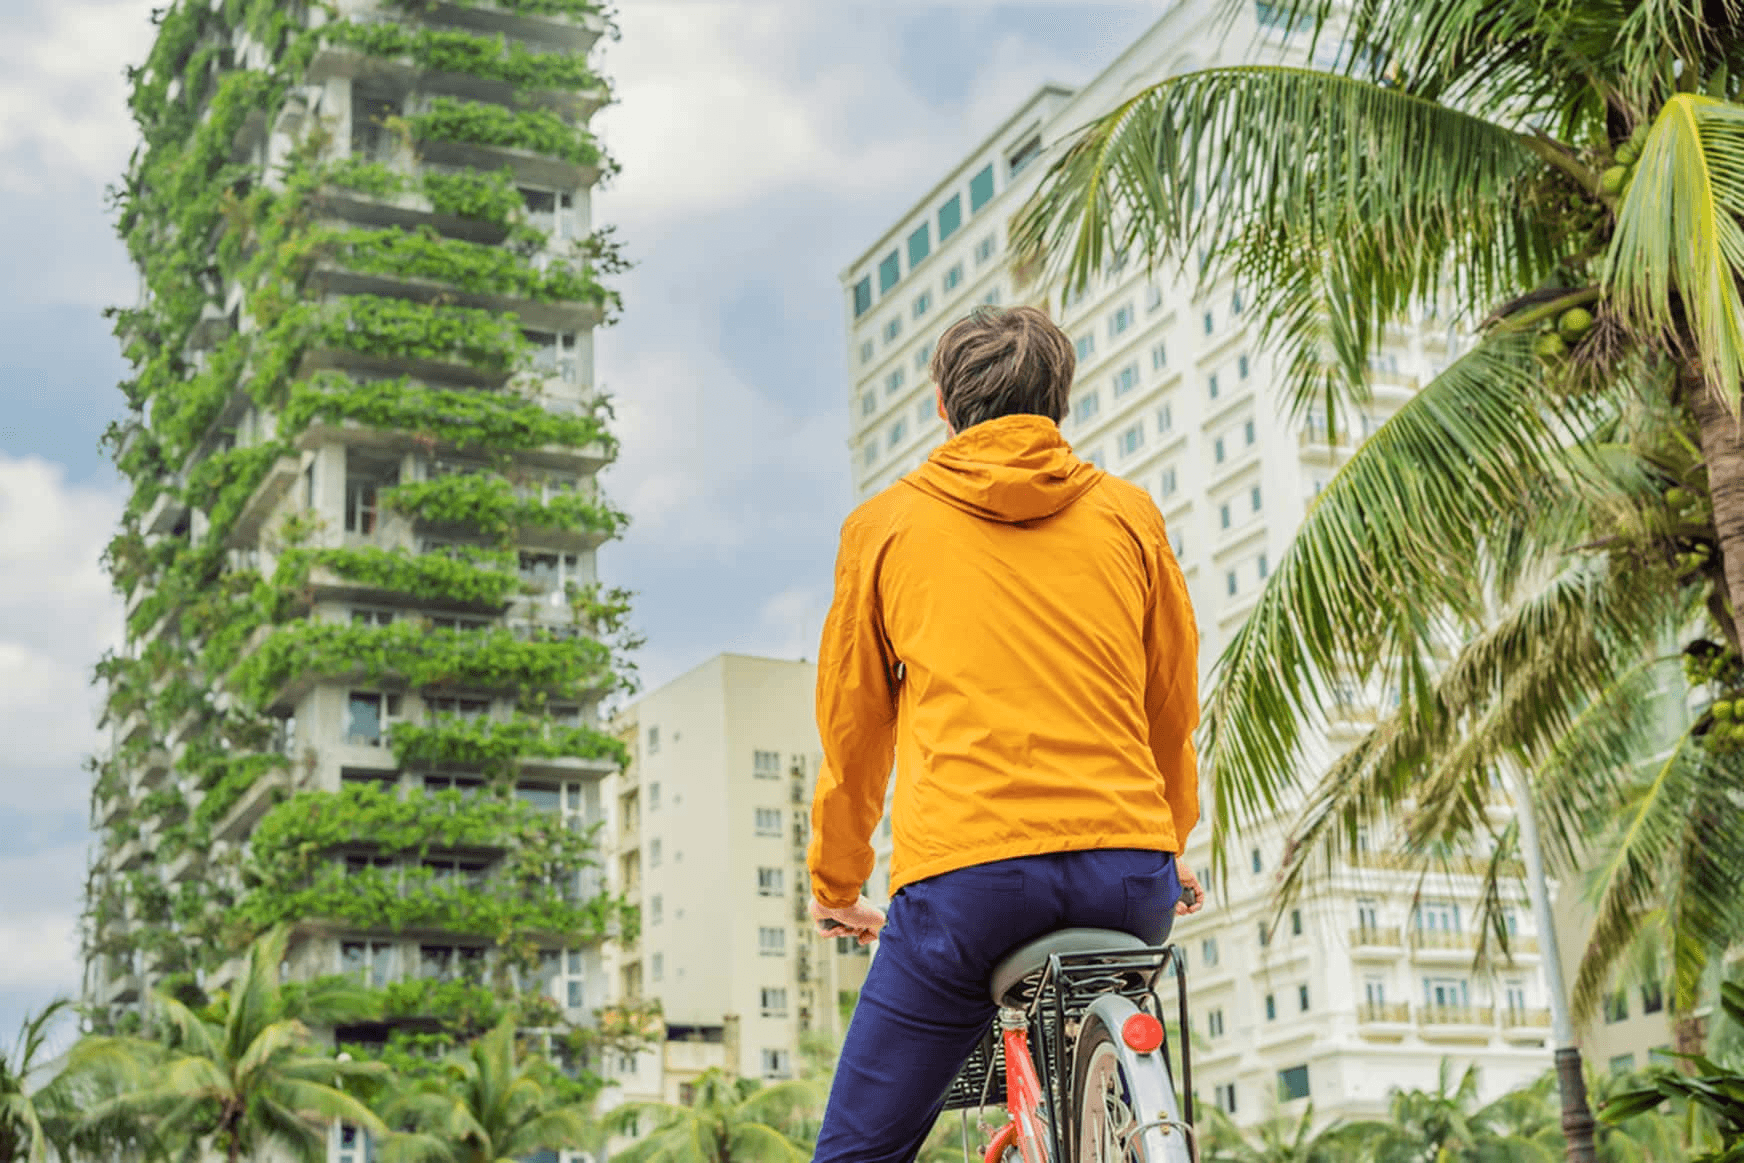 IE student on a bike with a yellow jacket looks at a nature fully covered building